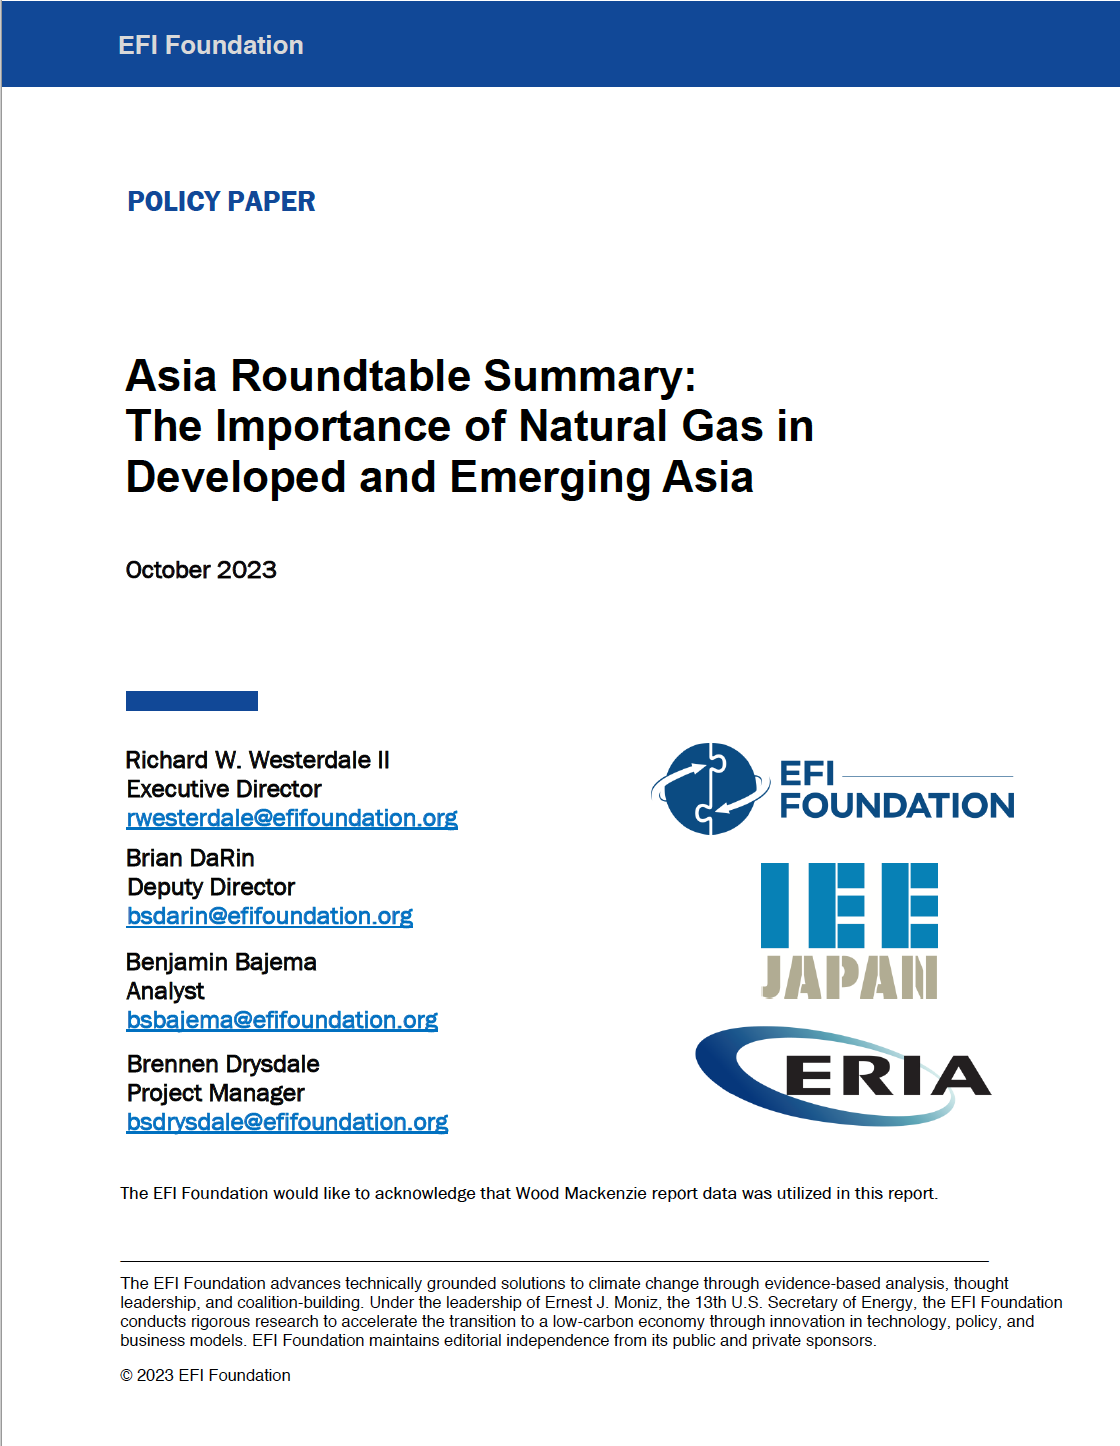 Image of Report Cover - Asia Roundtable Summary: The Importance of Natural Gas inDeveloped and Emerging Asia